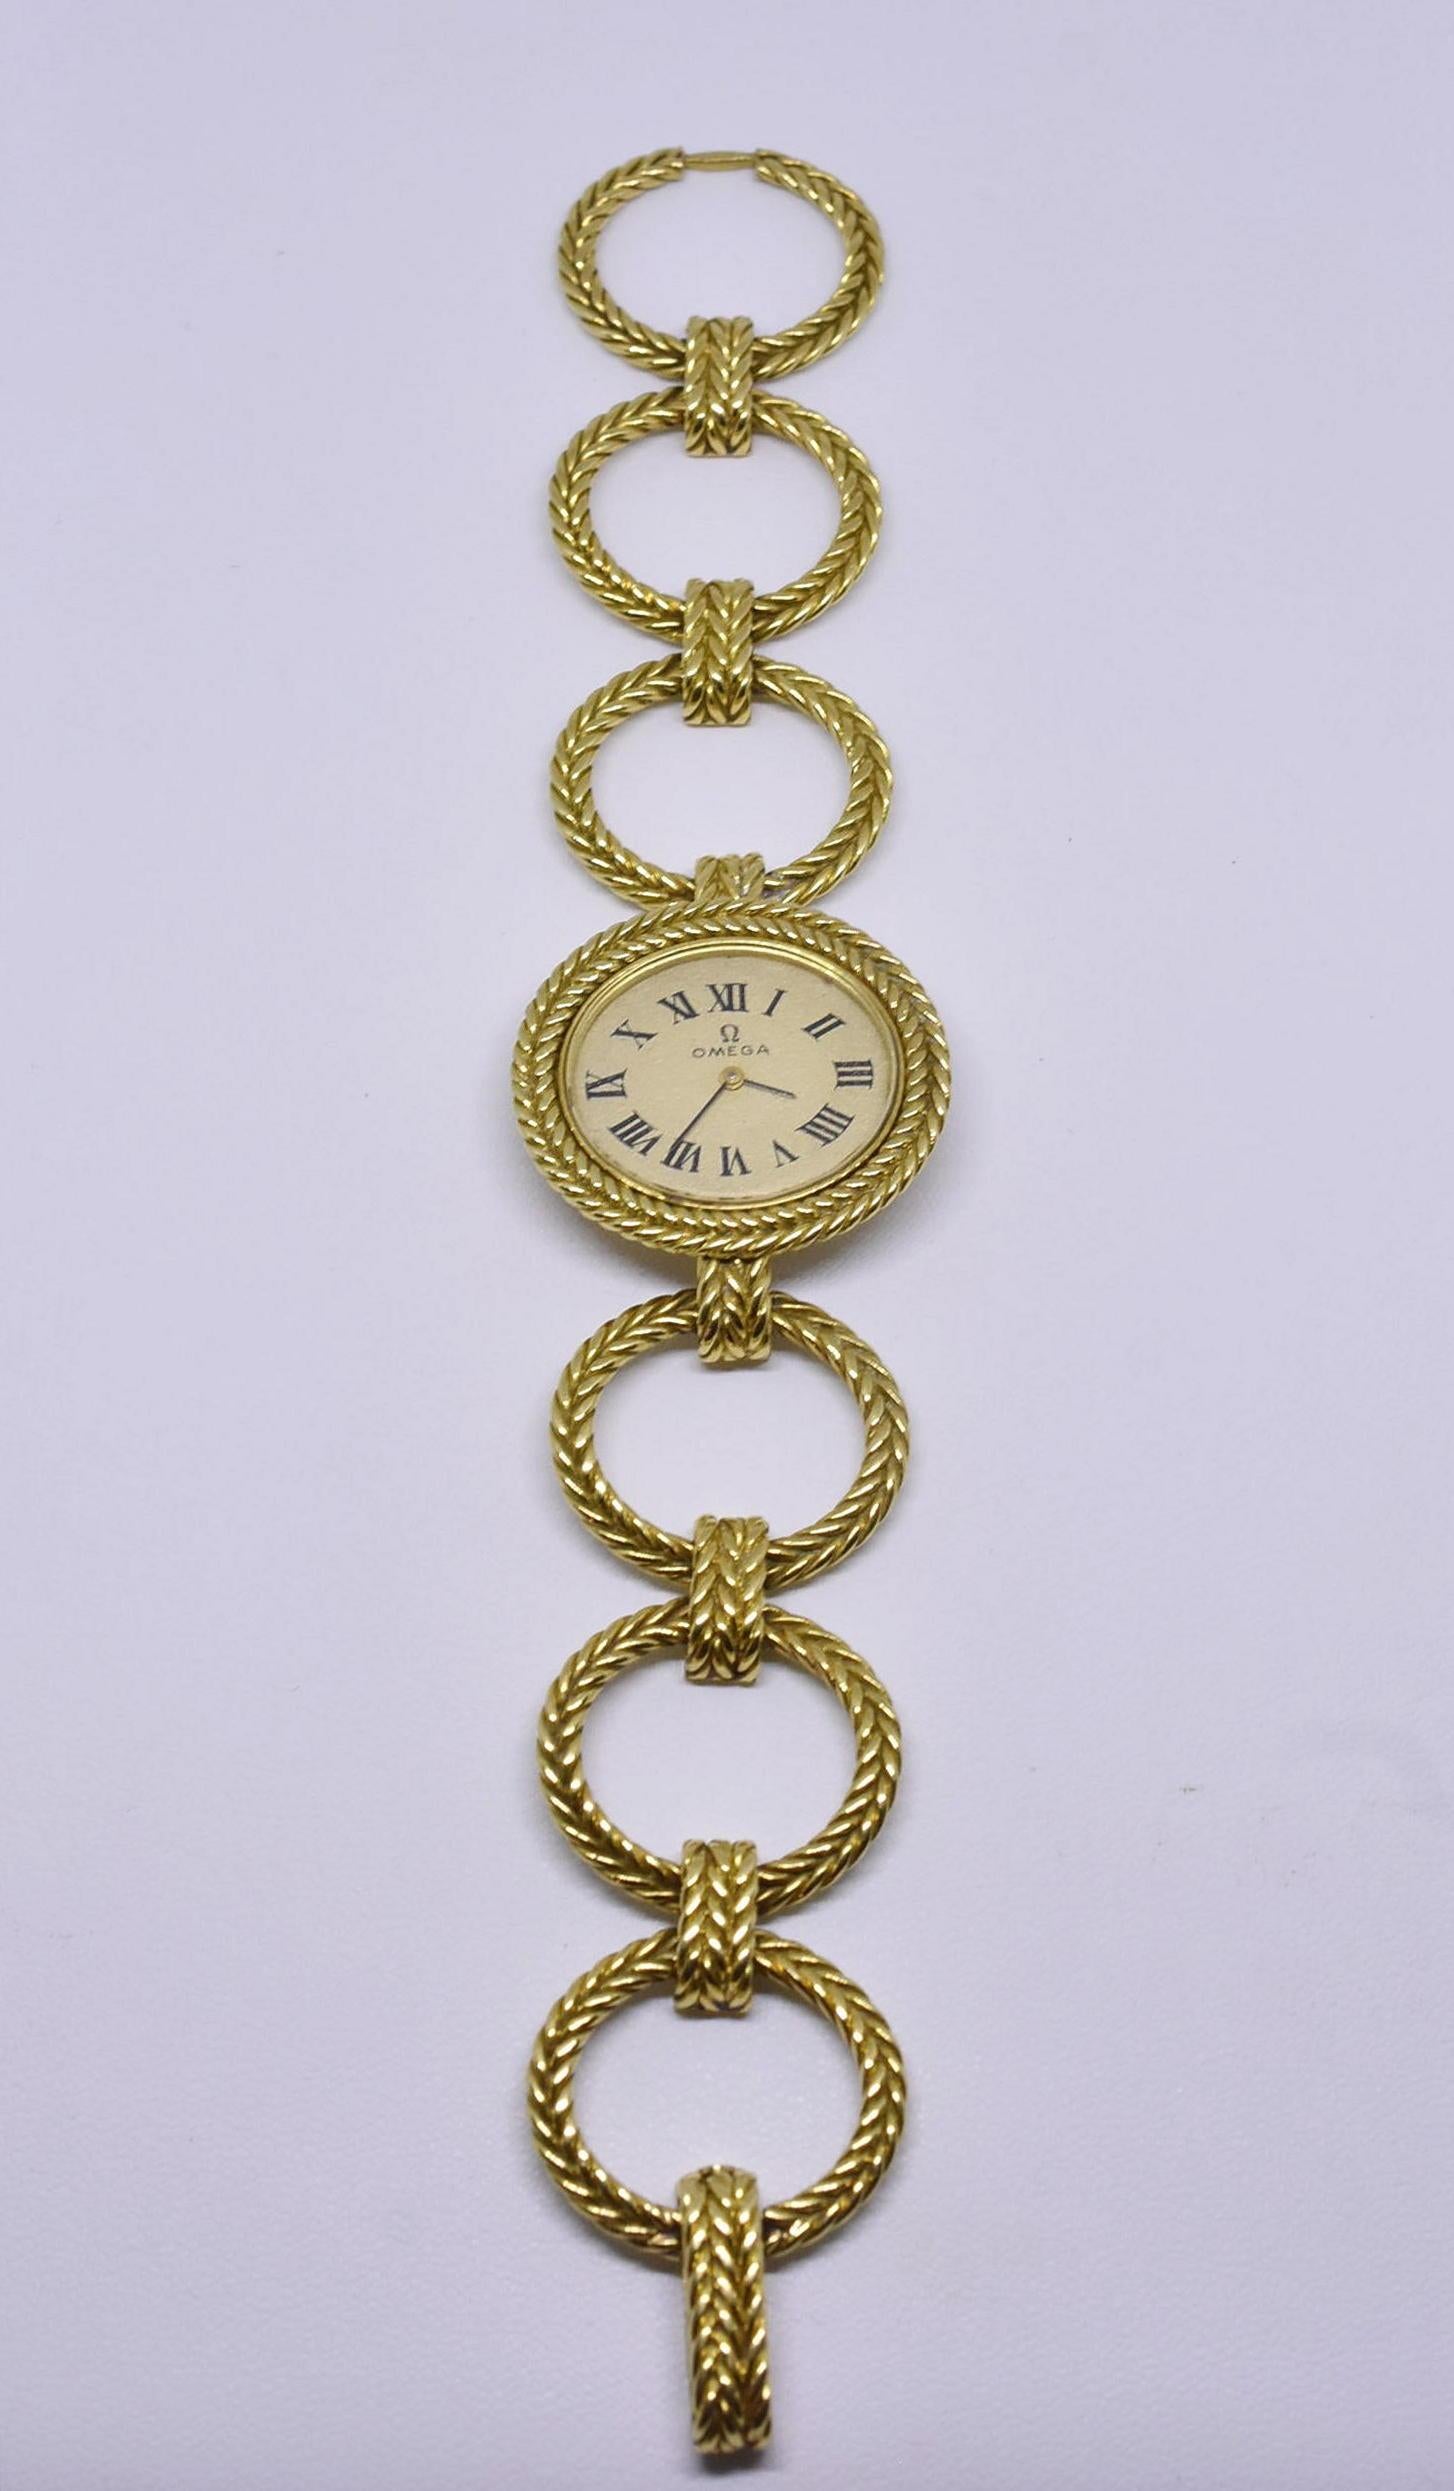 Beautiful ladies Omega 18-karat winding gold watch. This is an unusual watch with oval braided gold links making a bracelet. The dial is in excellent shape, the crystal has slight scratching due to age and use. Measures: 6 1/2